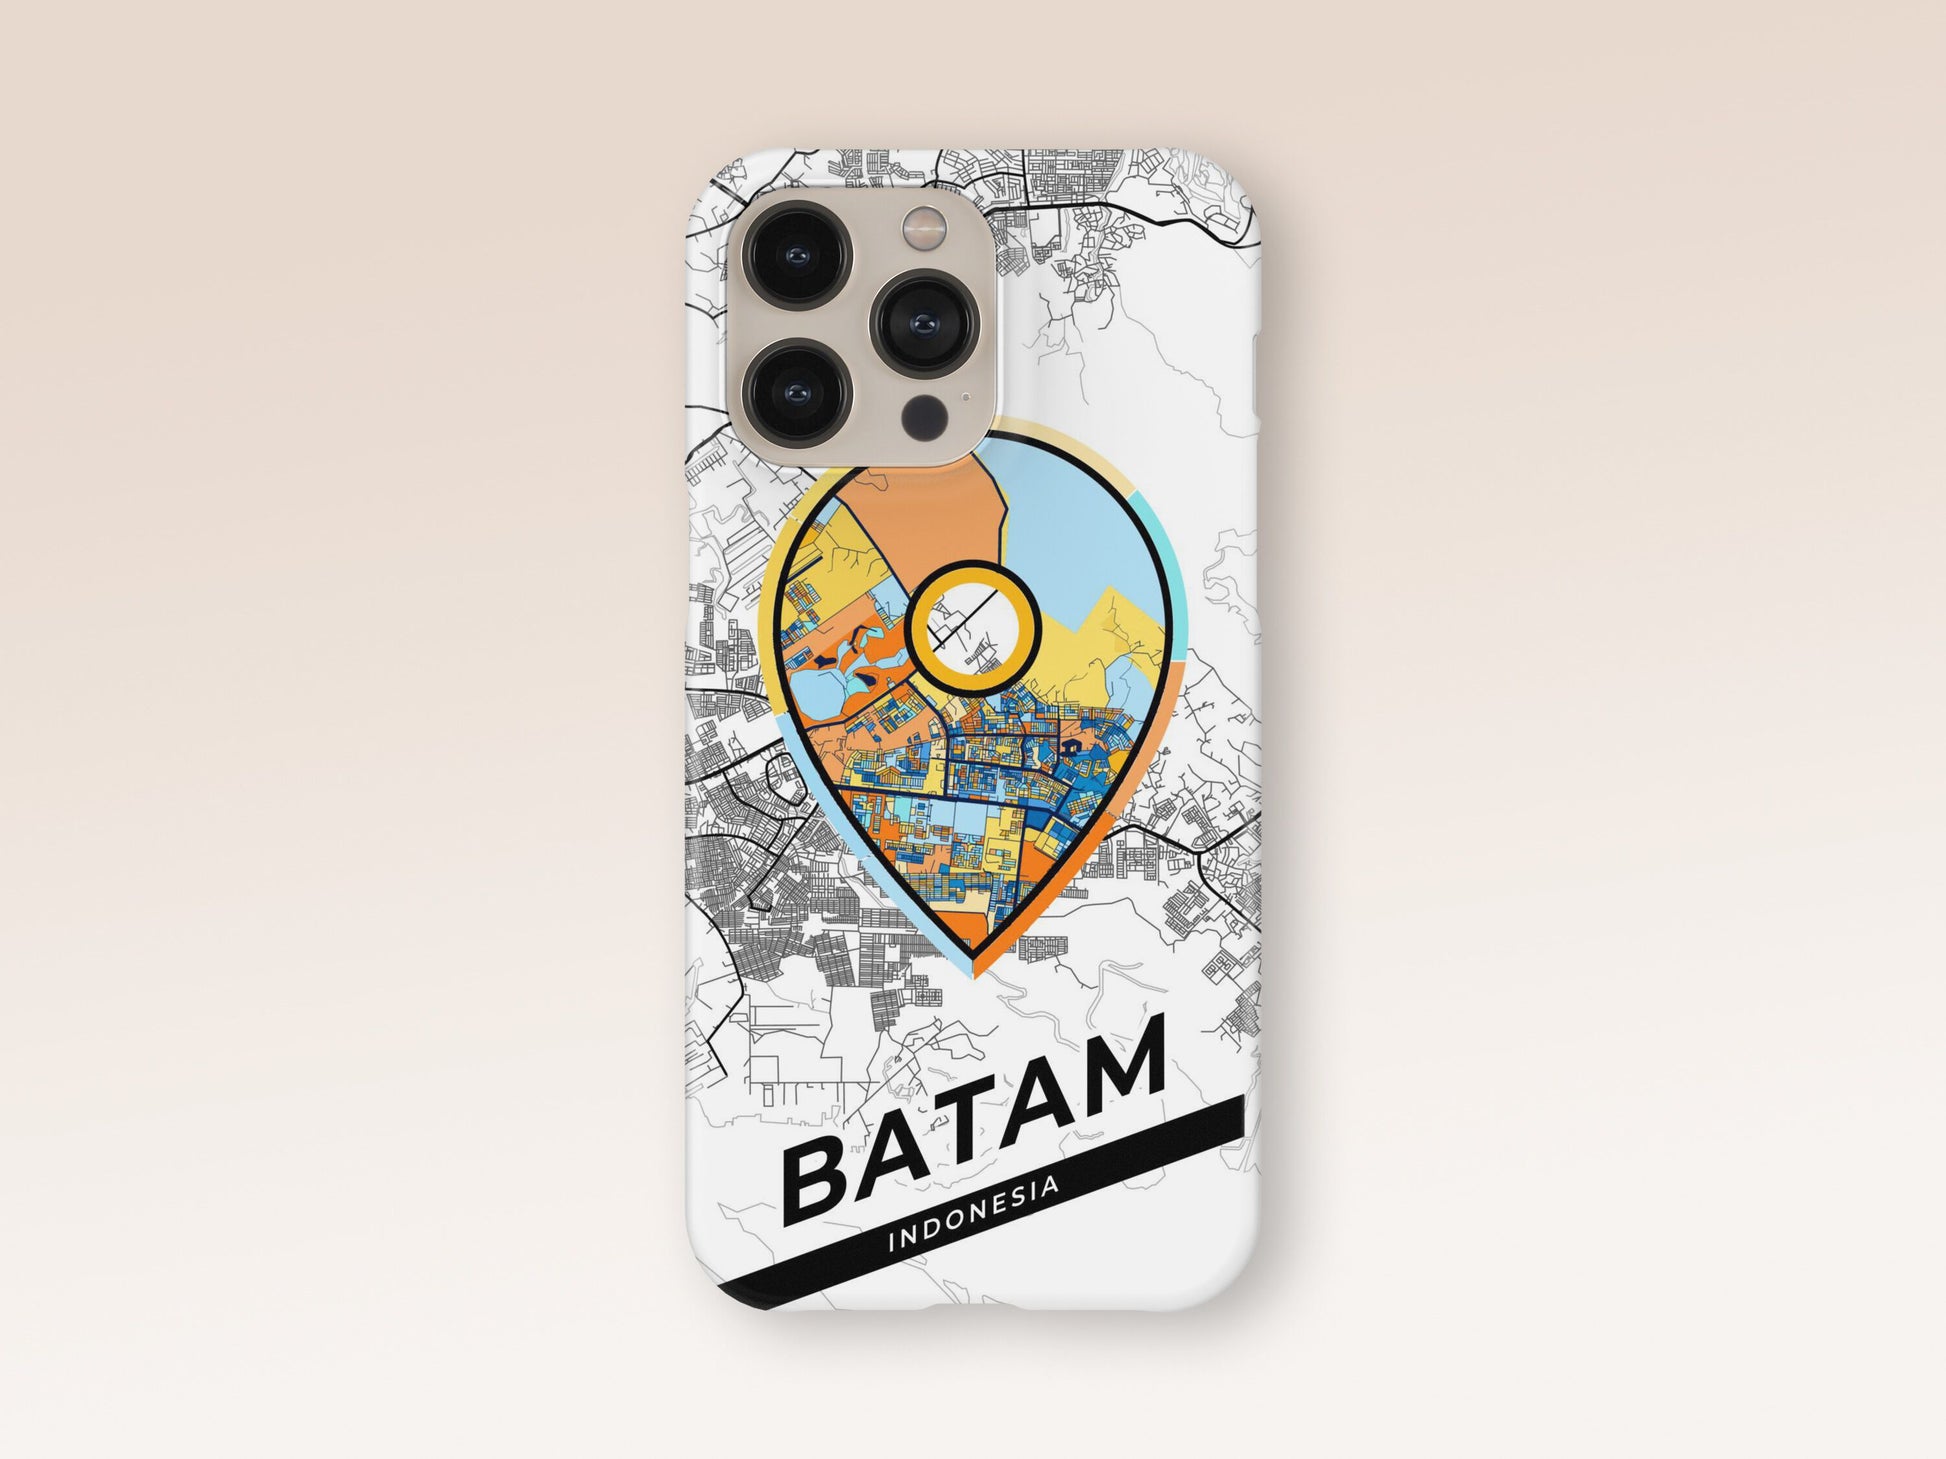 Batam Indonesia slim phone case with colorful icon. Birthday, wedding or housewarming gift. Couple match cases. 1